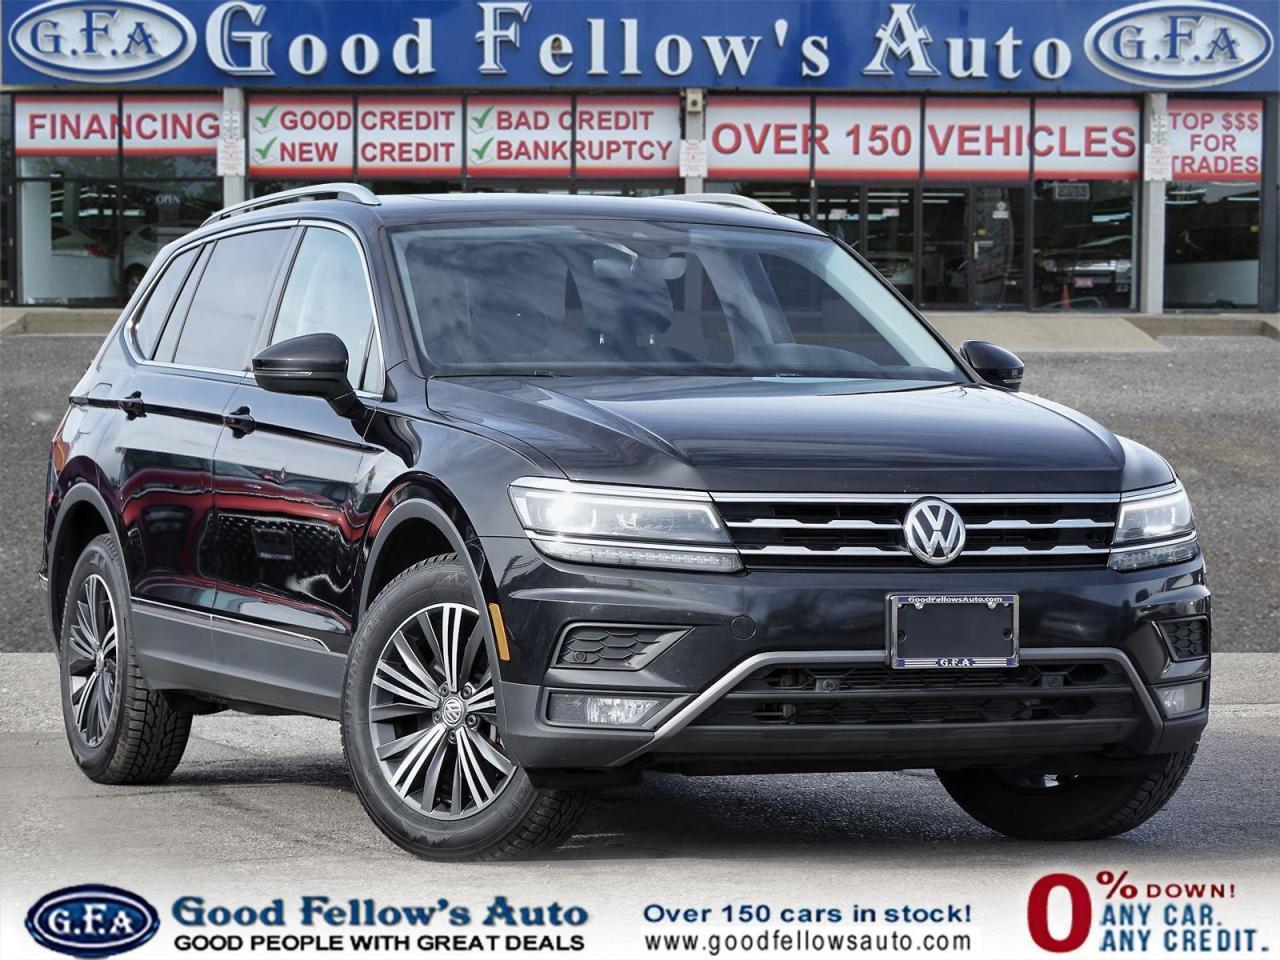 2020 Volkswagen Tiguan HIGHLINE MODEL, 4MOTION, LEATHER SEATS, PANORAMIC